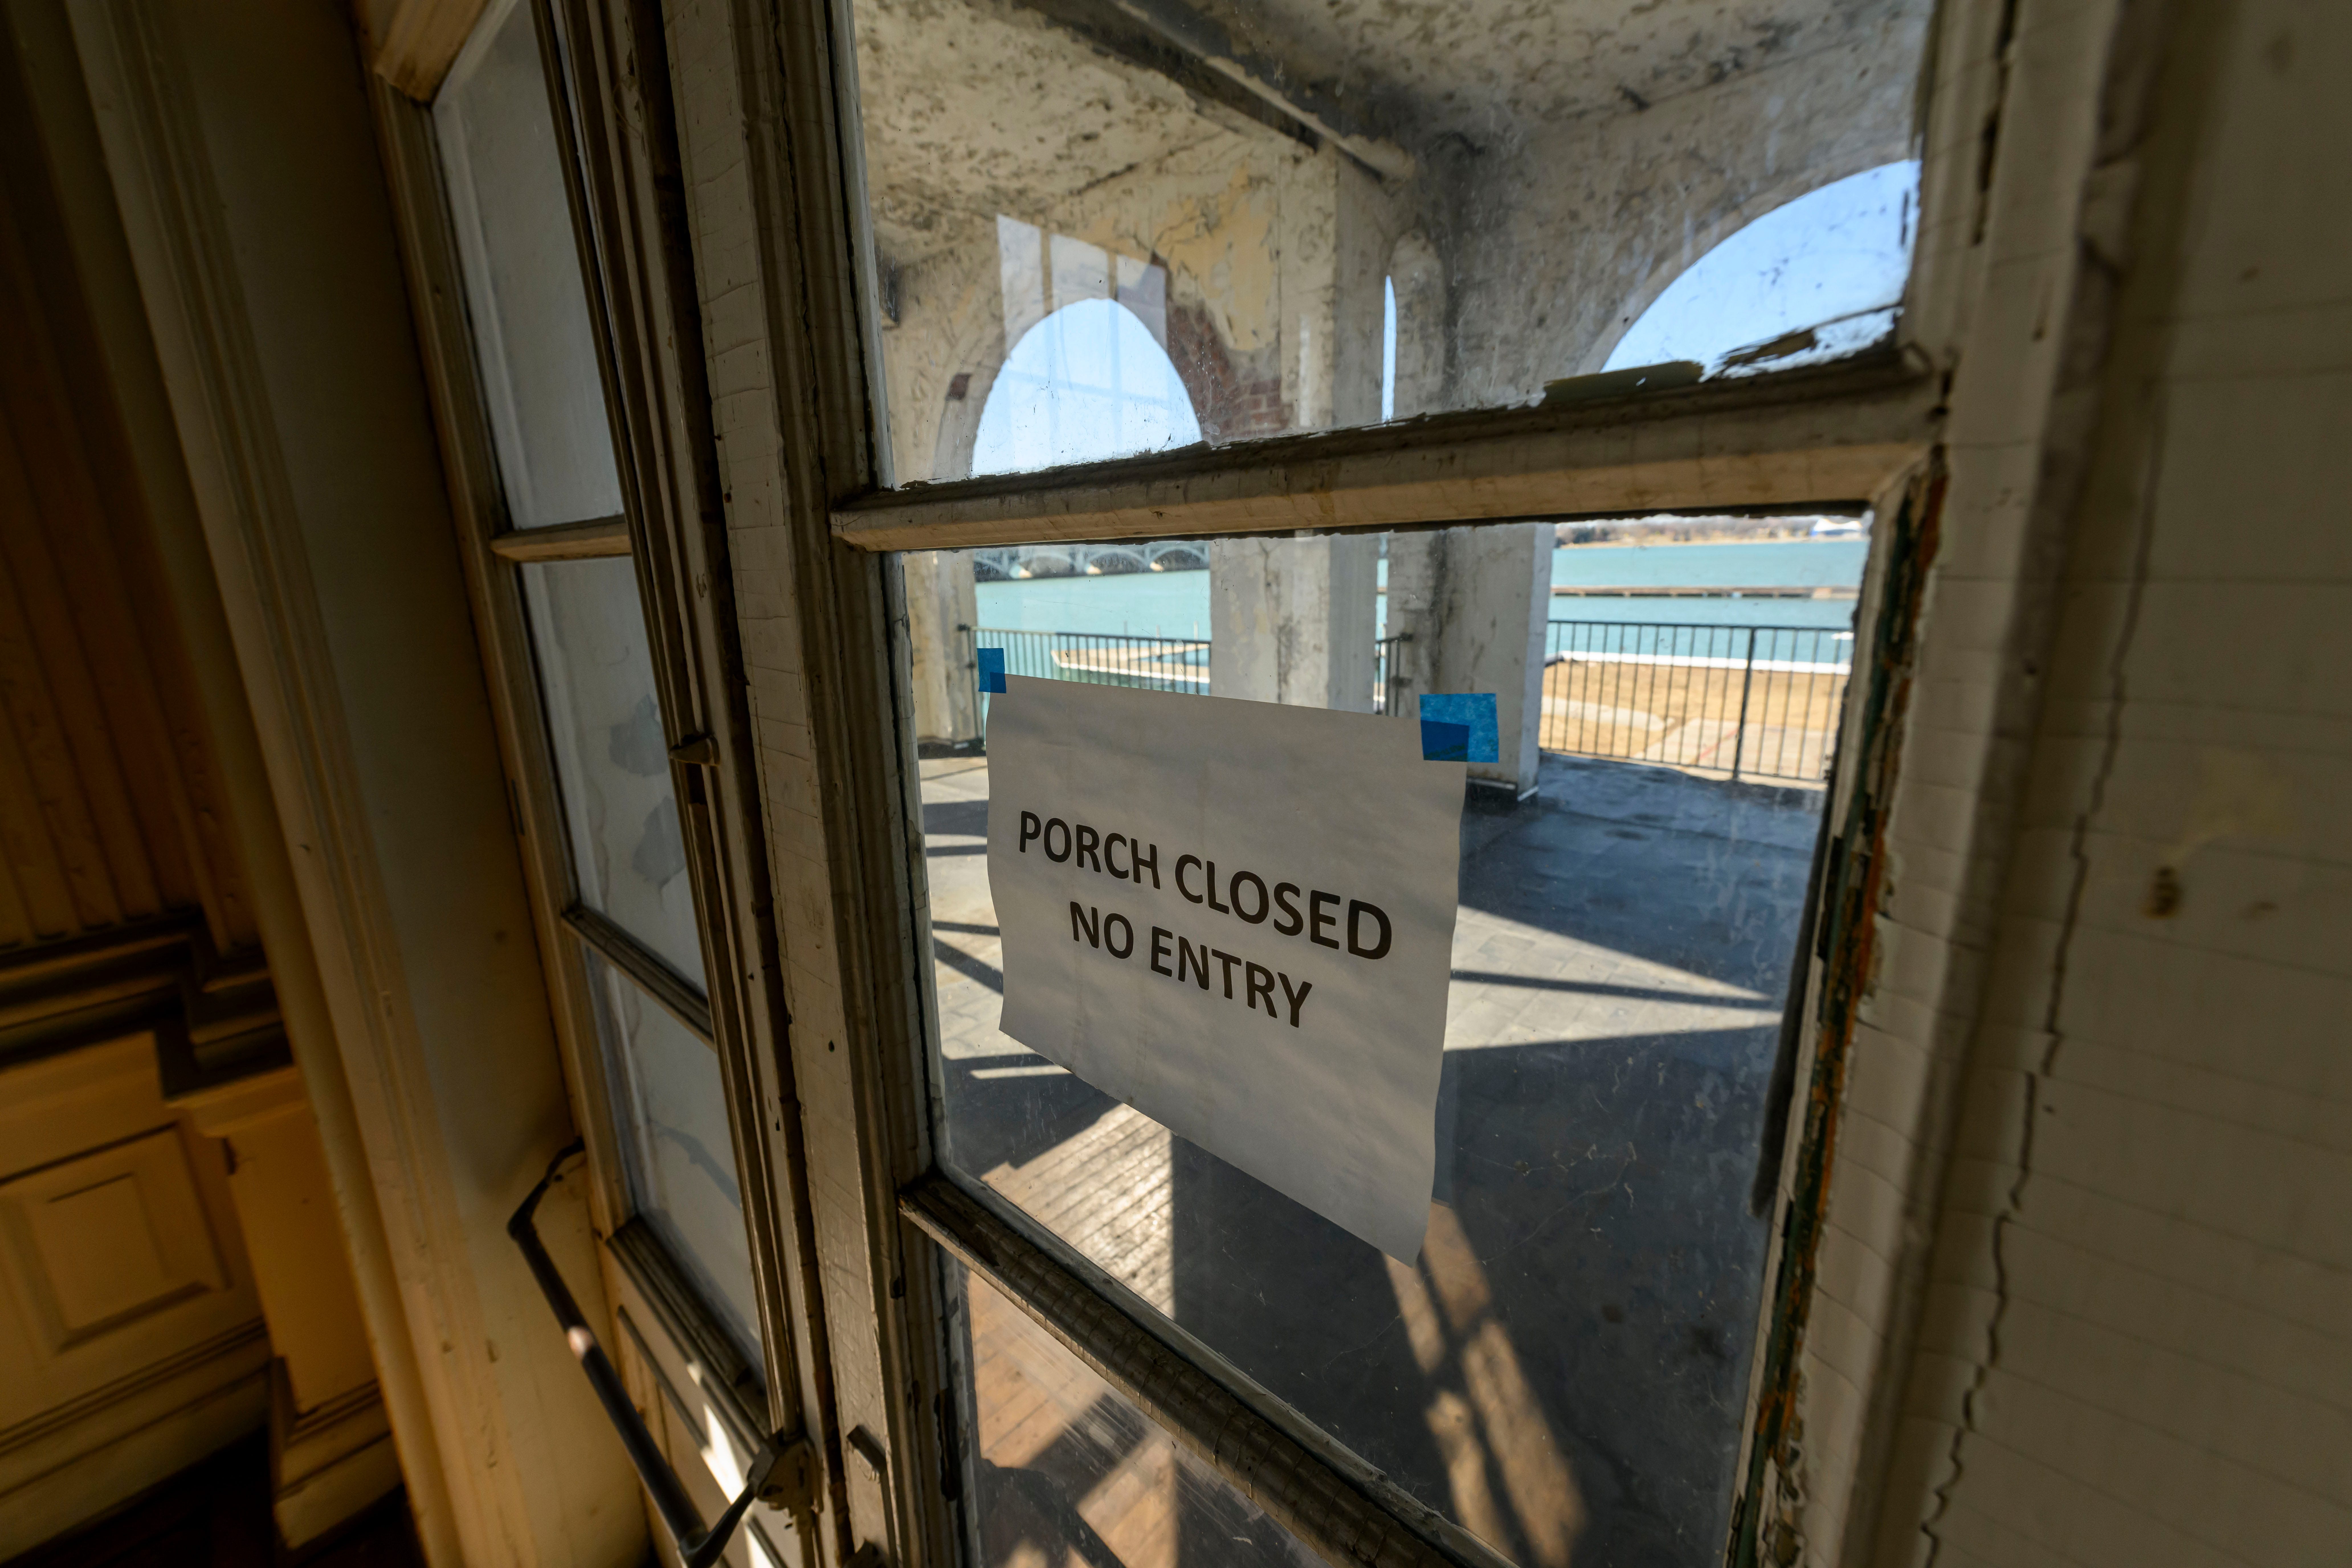 A porch closed due to damage can be seen through the windows of the Detroit Boat Club, on Belle Isle, February 29, 2024. Deemed structurally unsound since 2022, preservationists have led a successful effort to make the DNR, which operates Belle Isle, to attempt to restore the boathouse instead of demolishing it.